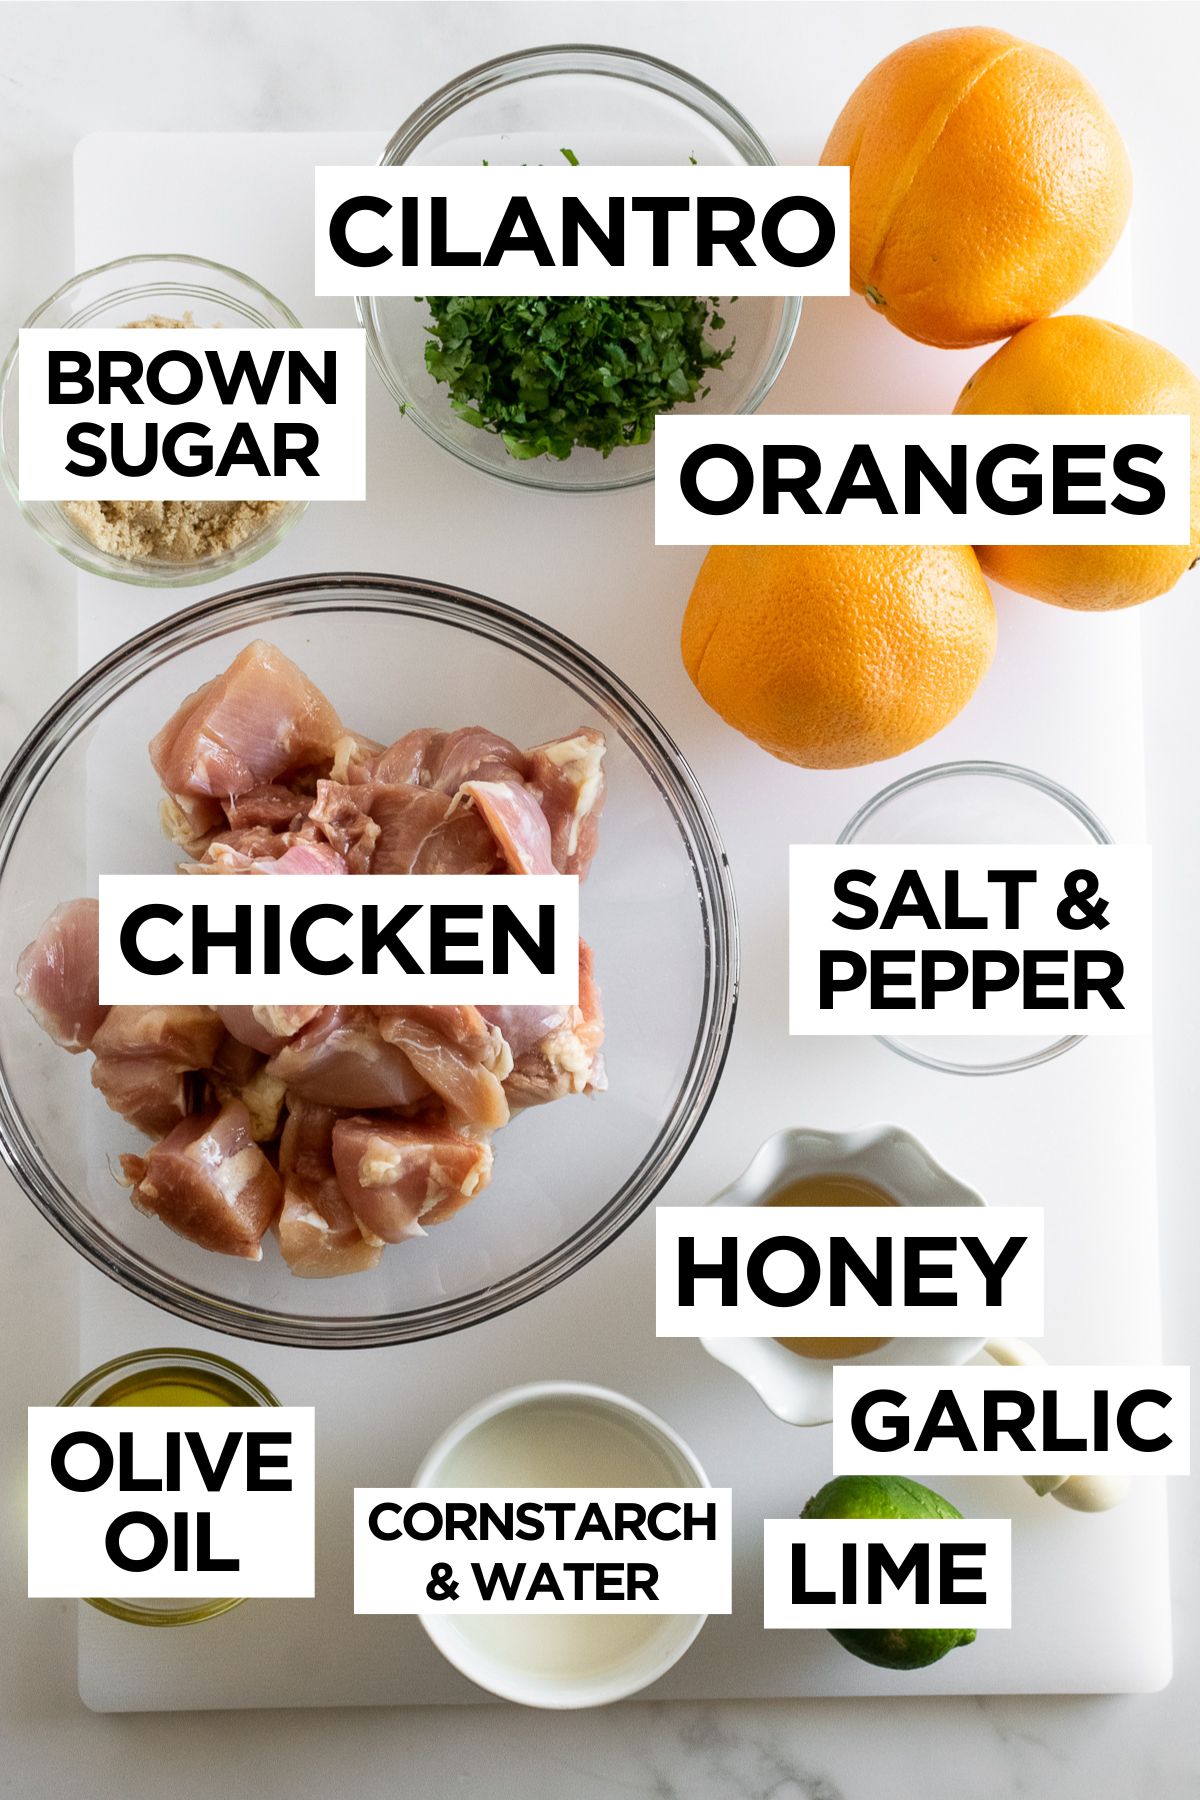 Juicy, tender and sweet– this cilantro orange chicken is minimum effort with maximum flavor making it an ideal dinner recipe for busy weeknights. The marinade adds incredible flavor to the chicken and creates the best sauce. Serve it alongside rice and beans with a homemade pineapple jalapeño salsa.